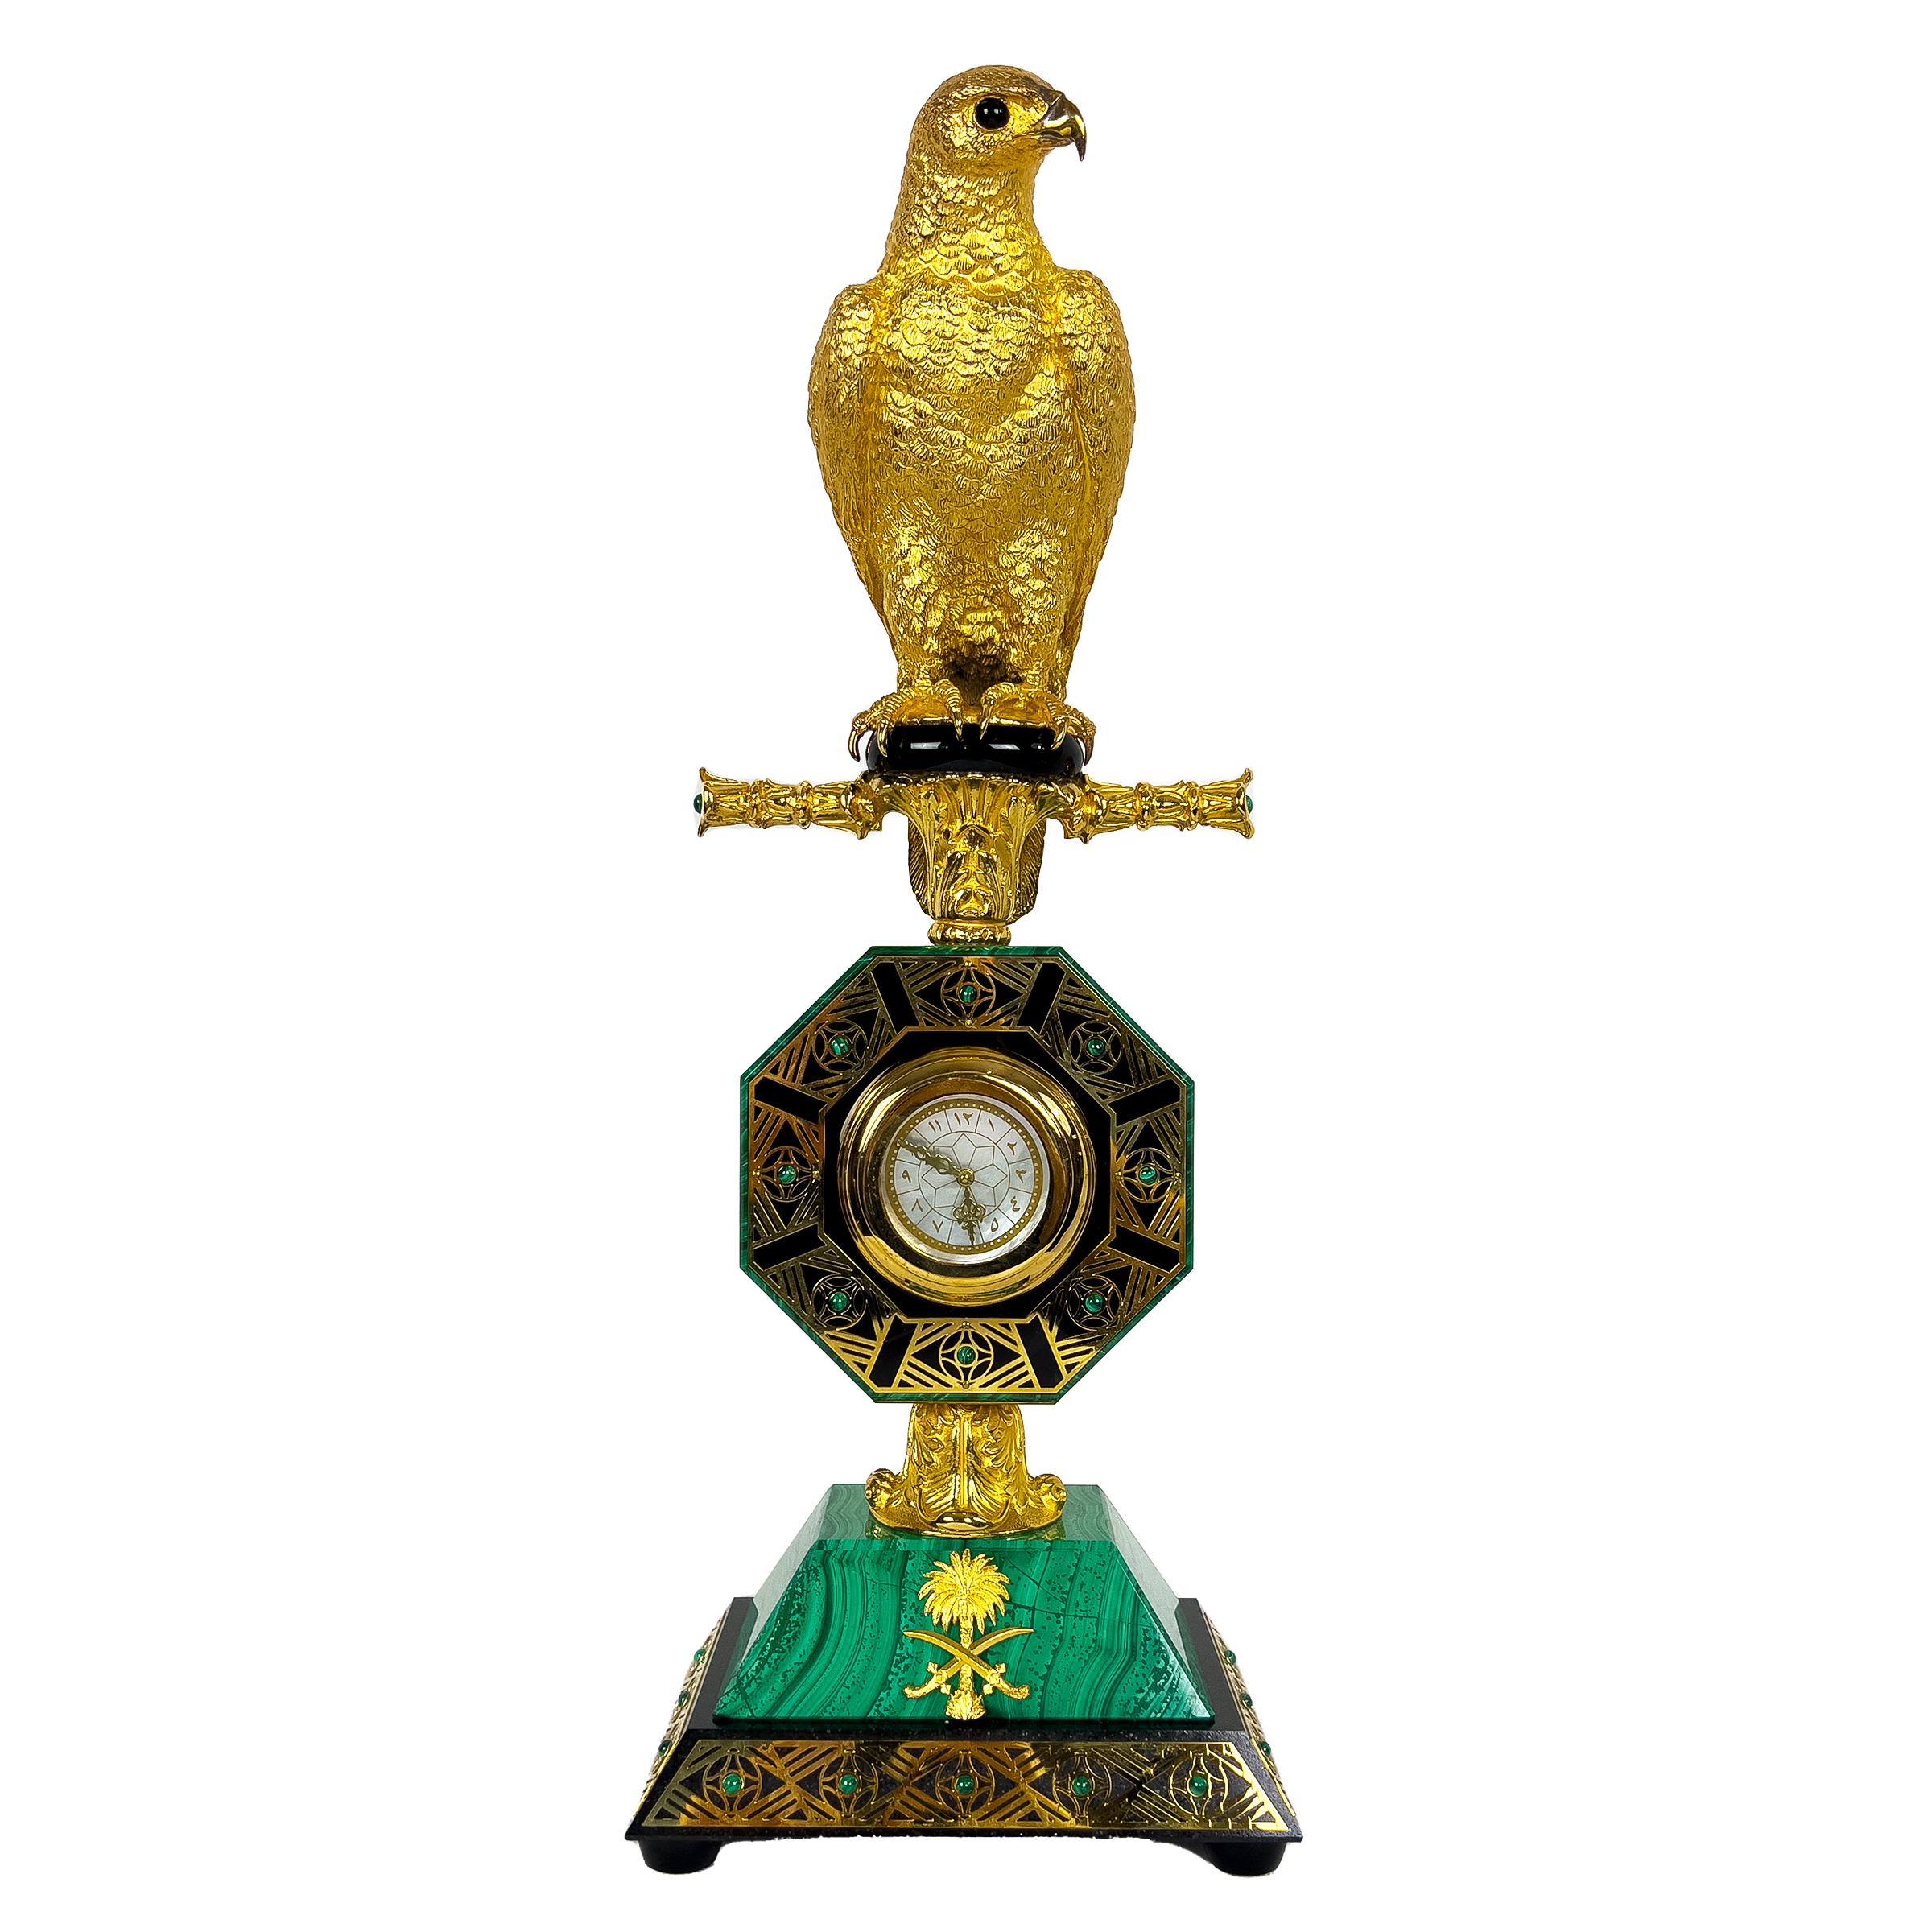 A clock falcon statue made of silver and malachite, presented as a gift to the Saudi Arabian royalty. Delve into the world of opulence and elegance with this stunning Silver Malachite Clock. Crafted with meticulous attention to detail, this